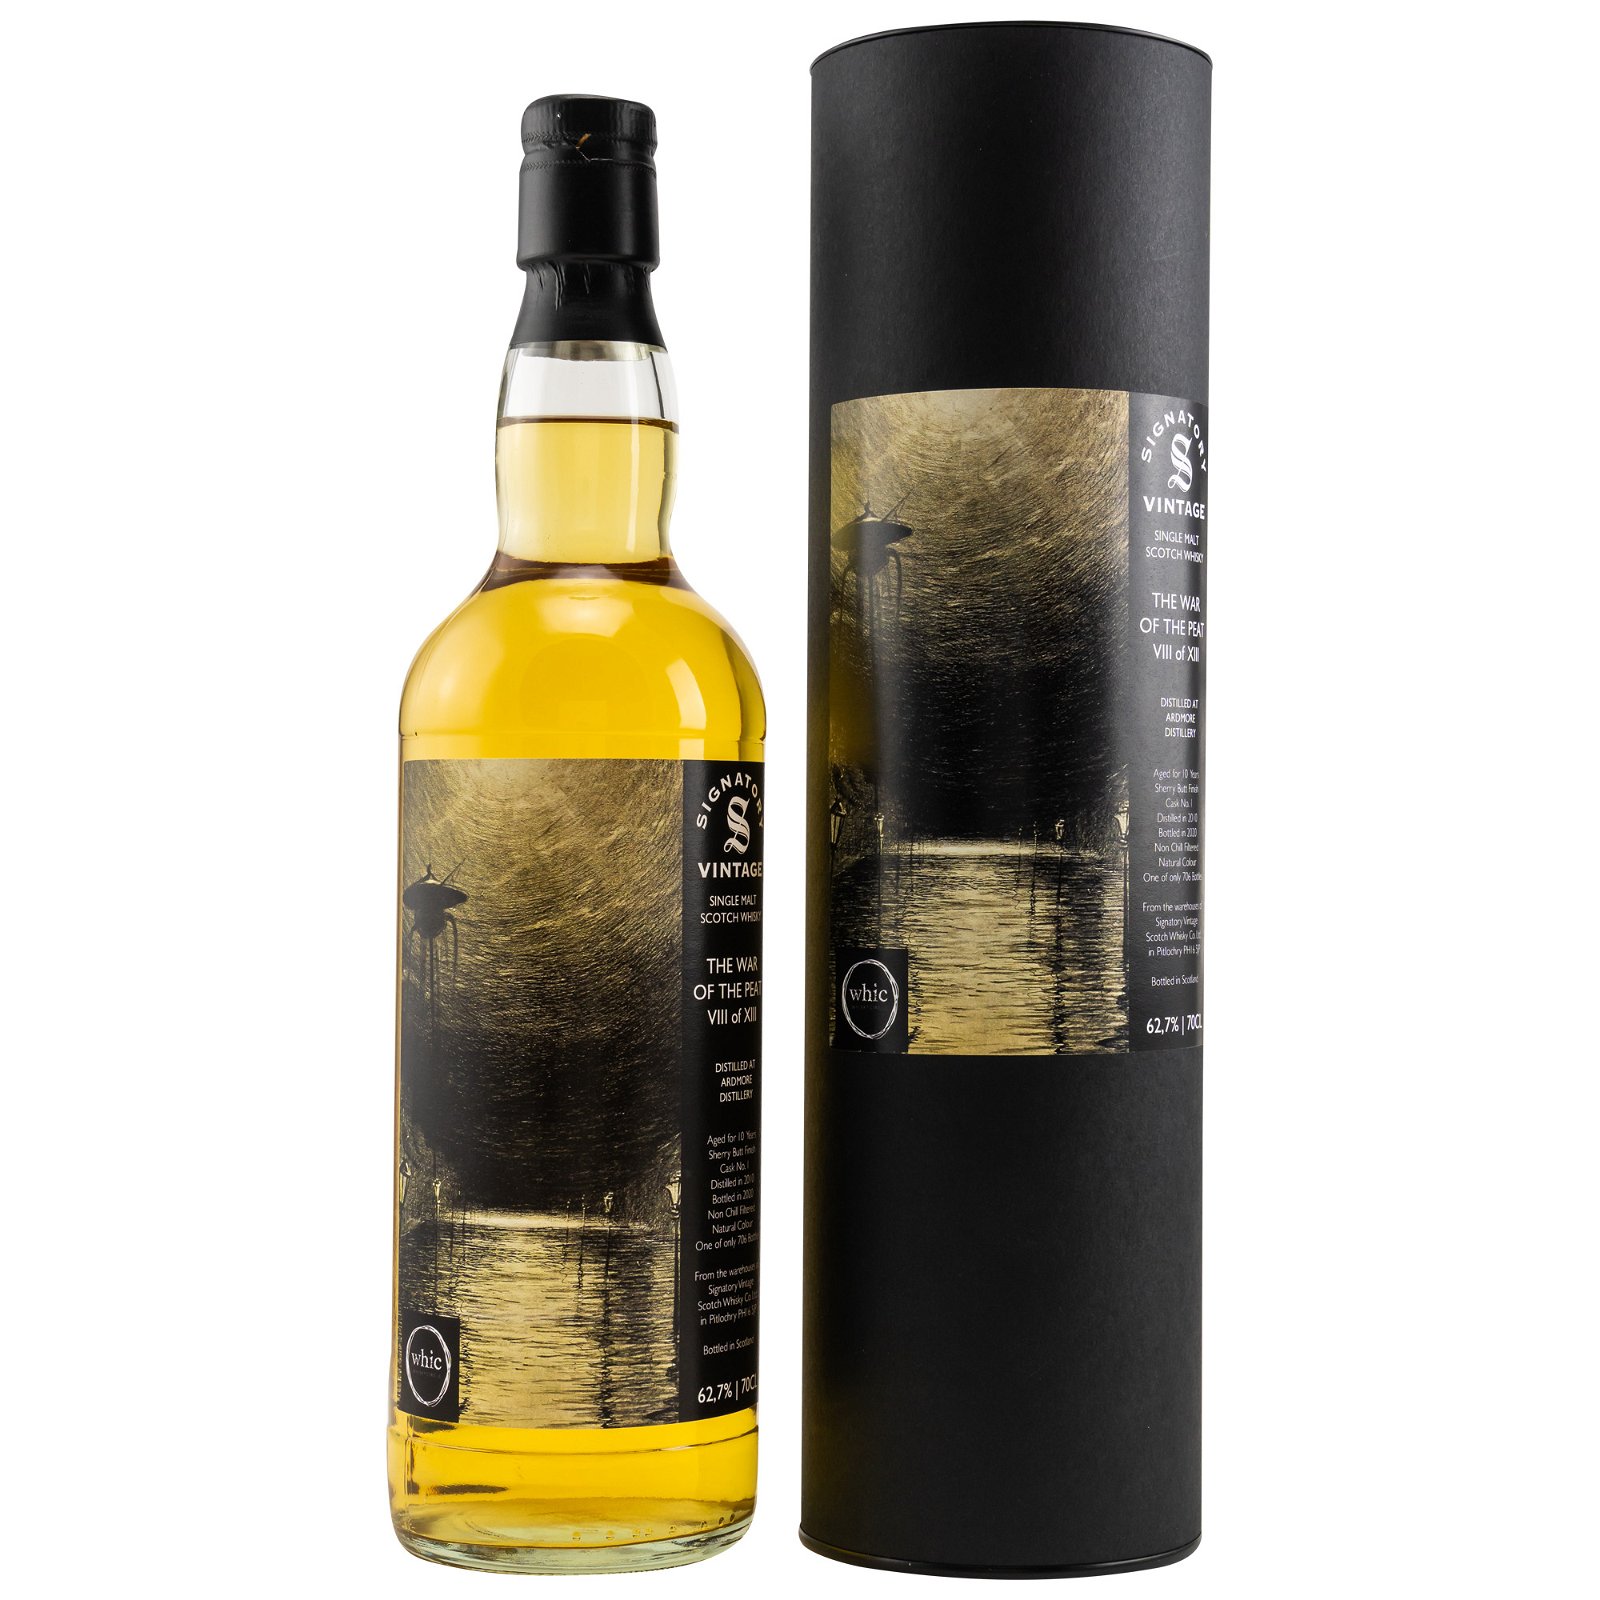  Ardmore 2010/2020 - 10 Jahre Sherry Butt Finish Cask 1 The War of the Peat VIII of XIII (whic)